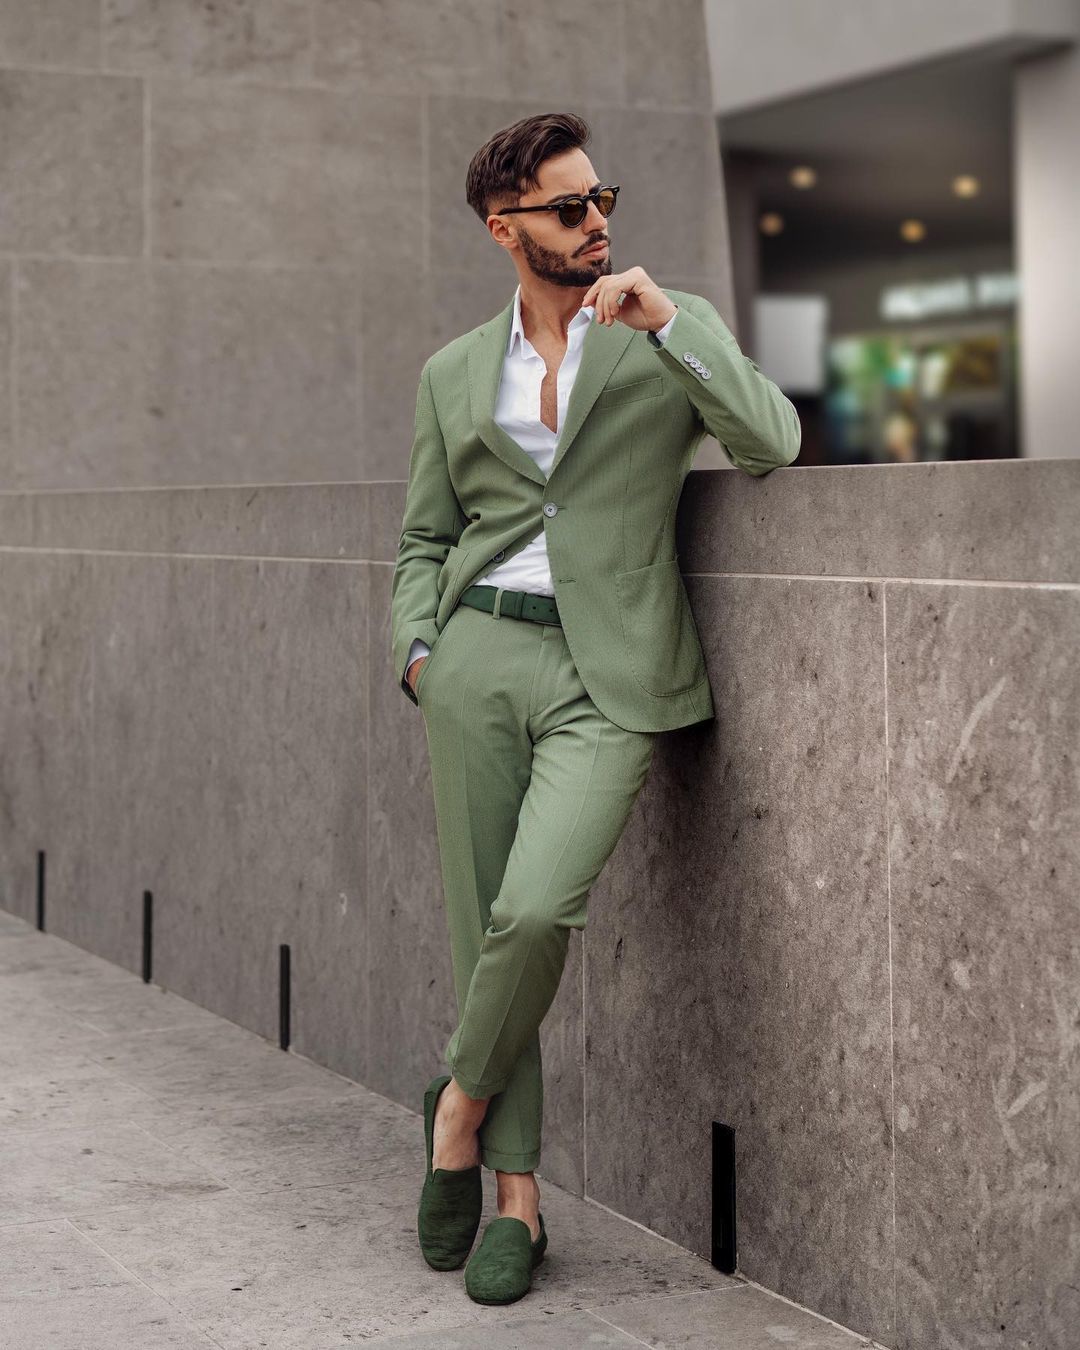 Wearing a green suit casually